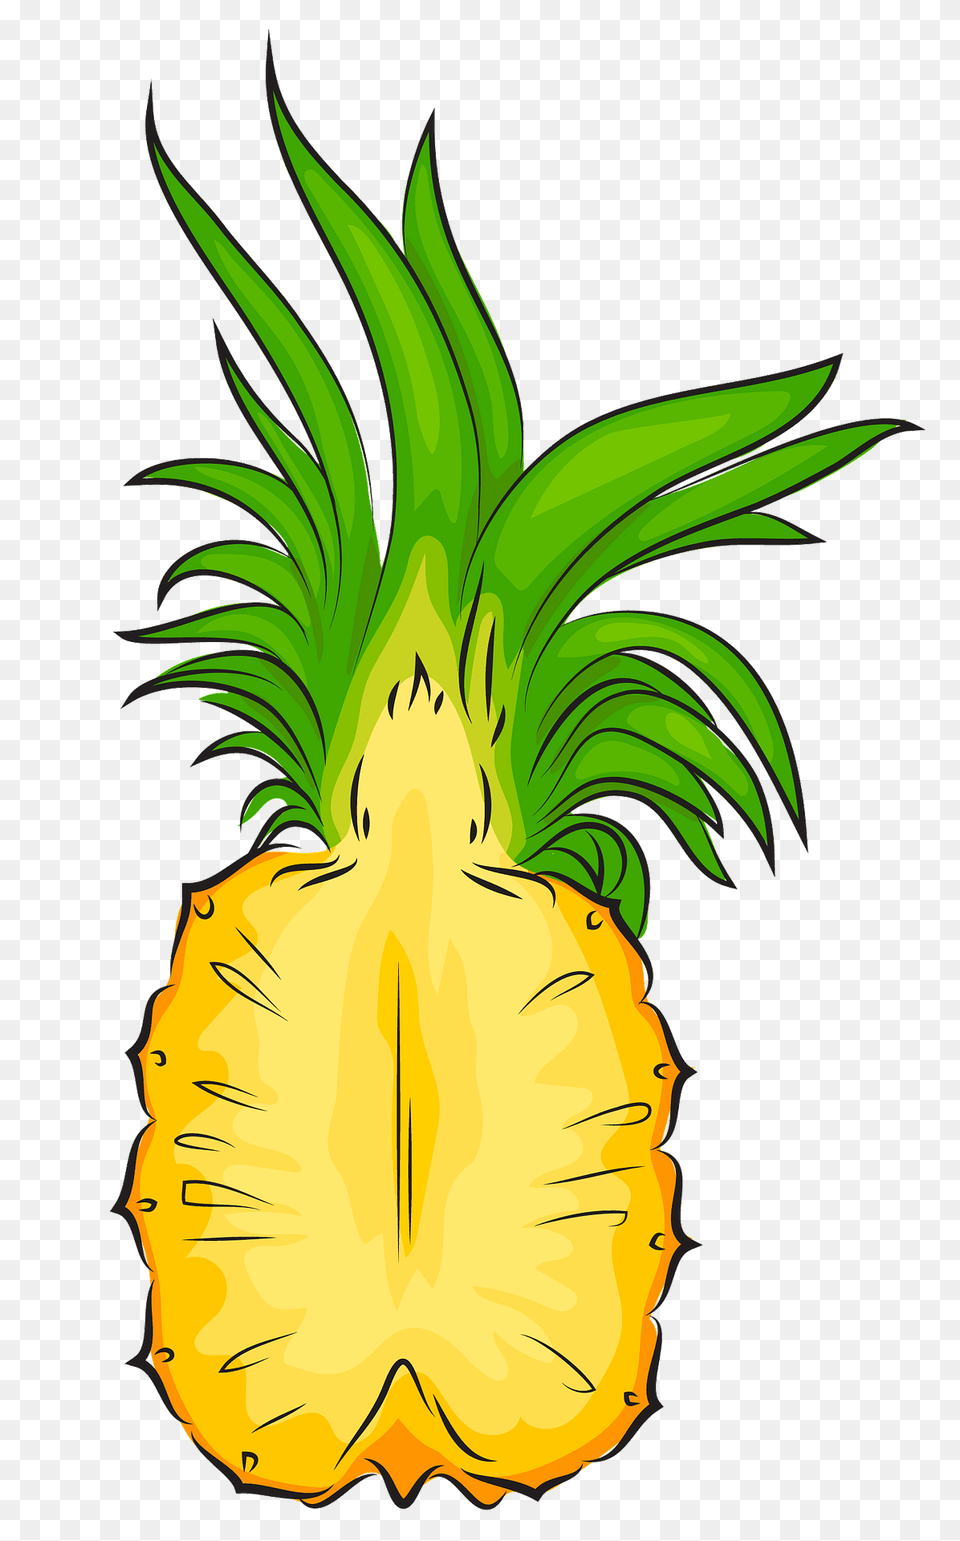 Pineapple Cut In Half Clipart Download Creazilla Pineapple Cut In Half, Food, Fruit, Plant, Produce Free Png